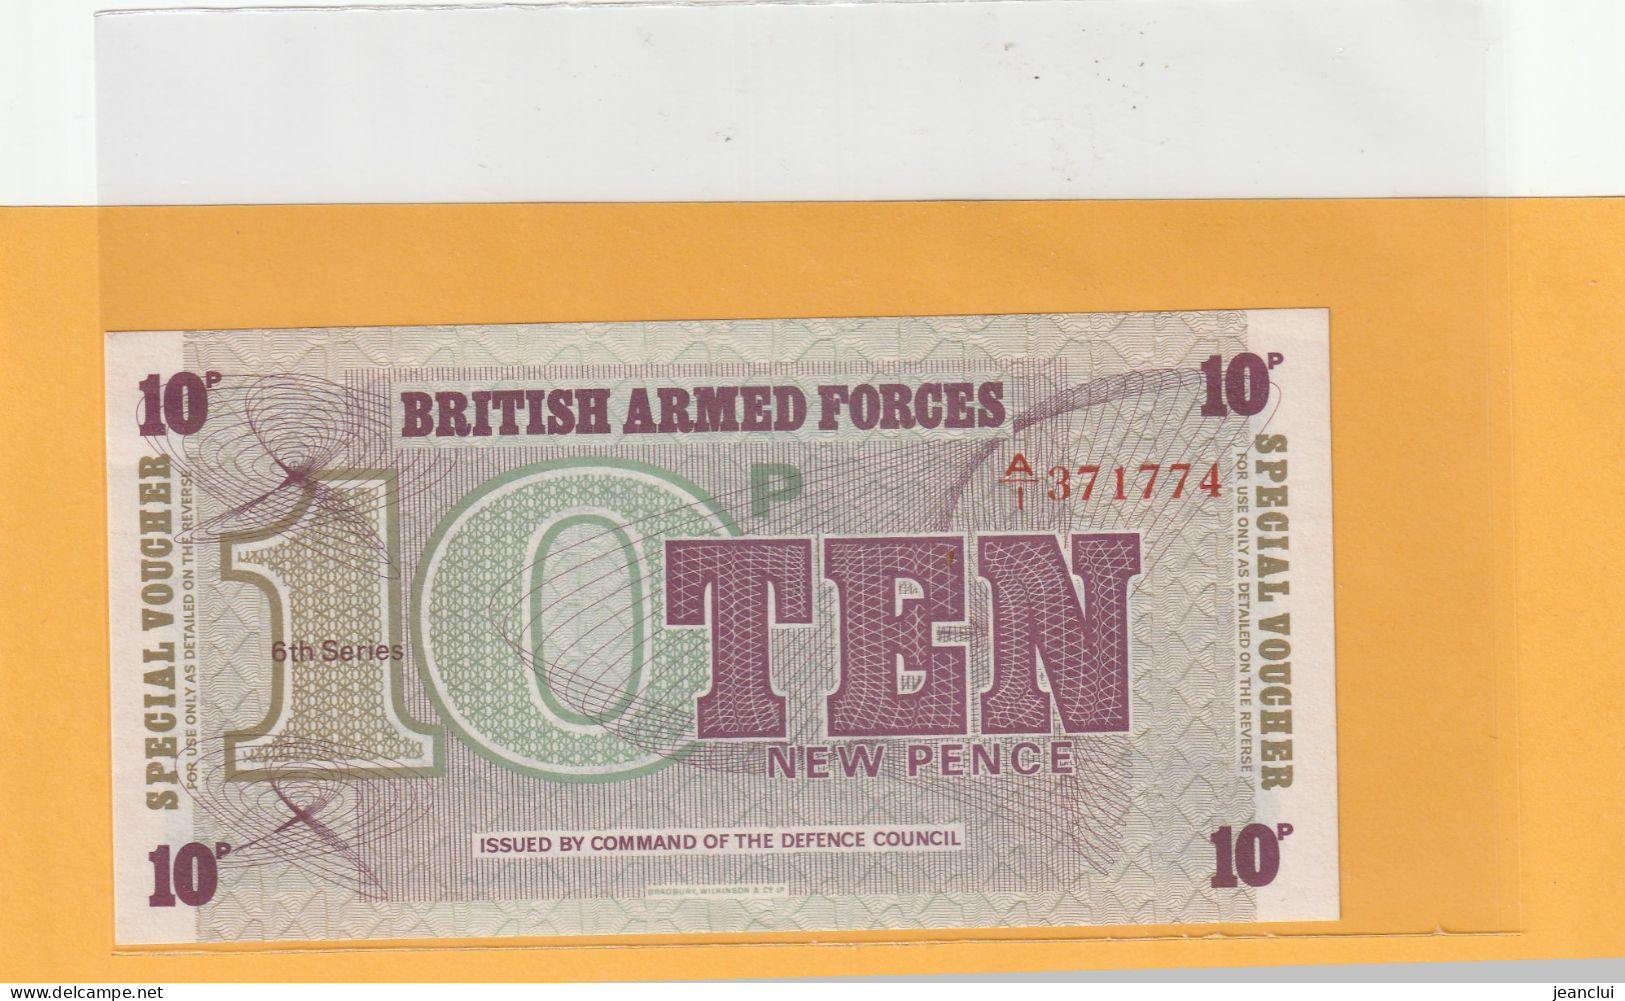 BRITISH ARMED FORCES . SPECIAL VOUCHERS  .  10 NEW PENCE  .  6th SERIES  .  N° A/1 371774  .UNC  .  2 SCANES - Forze Armate Britanniche & Docuementi Speciali